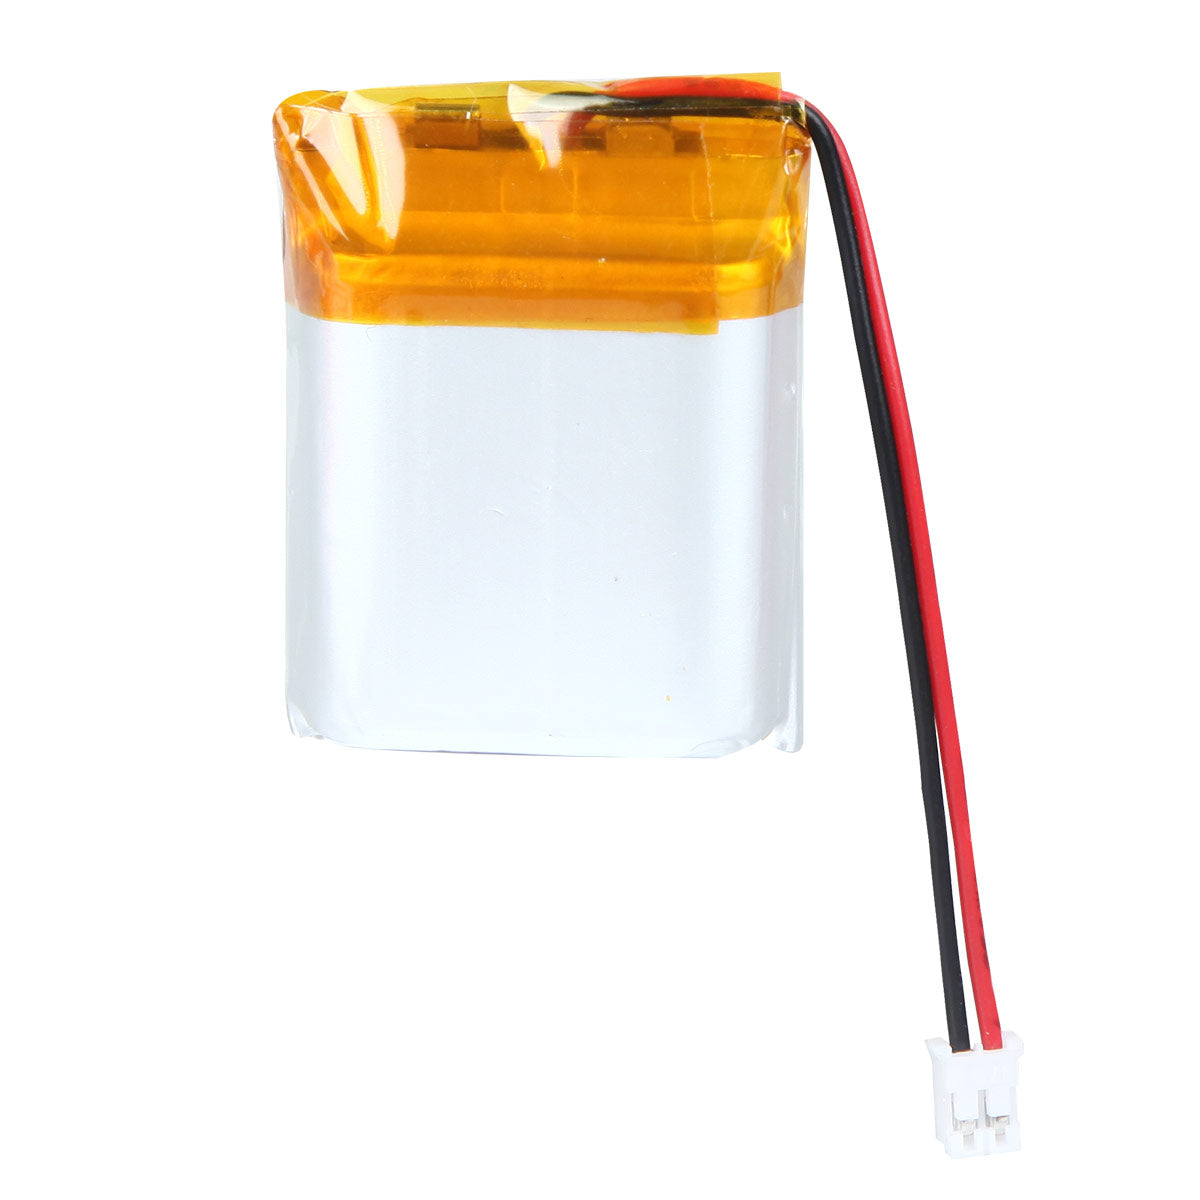 YDL 3.7V 680mAh 102530 Rechargeable Lithium  Polymer Battery